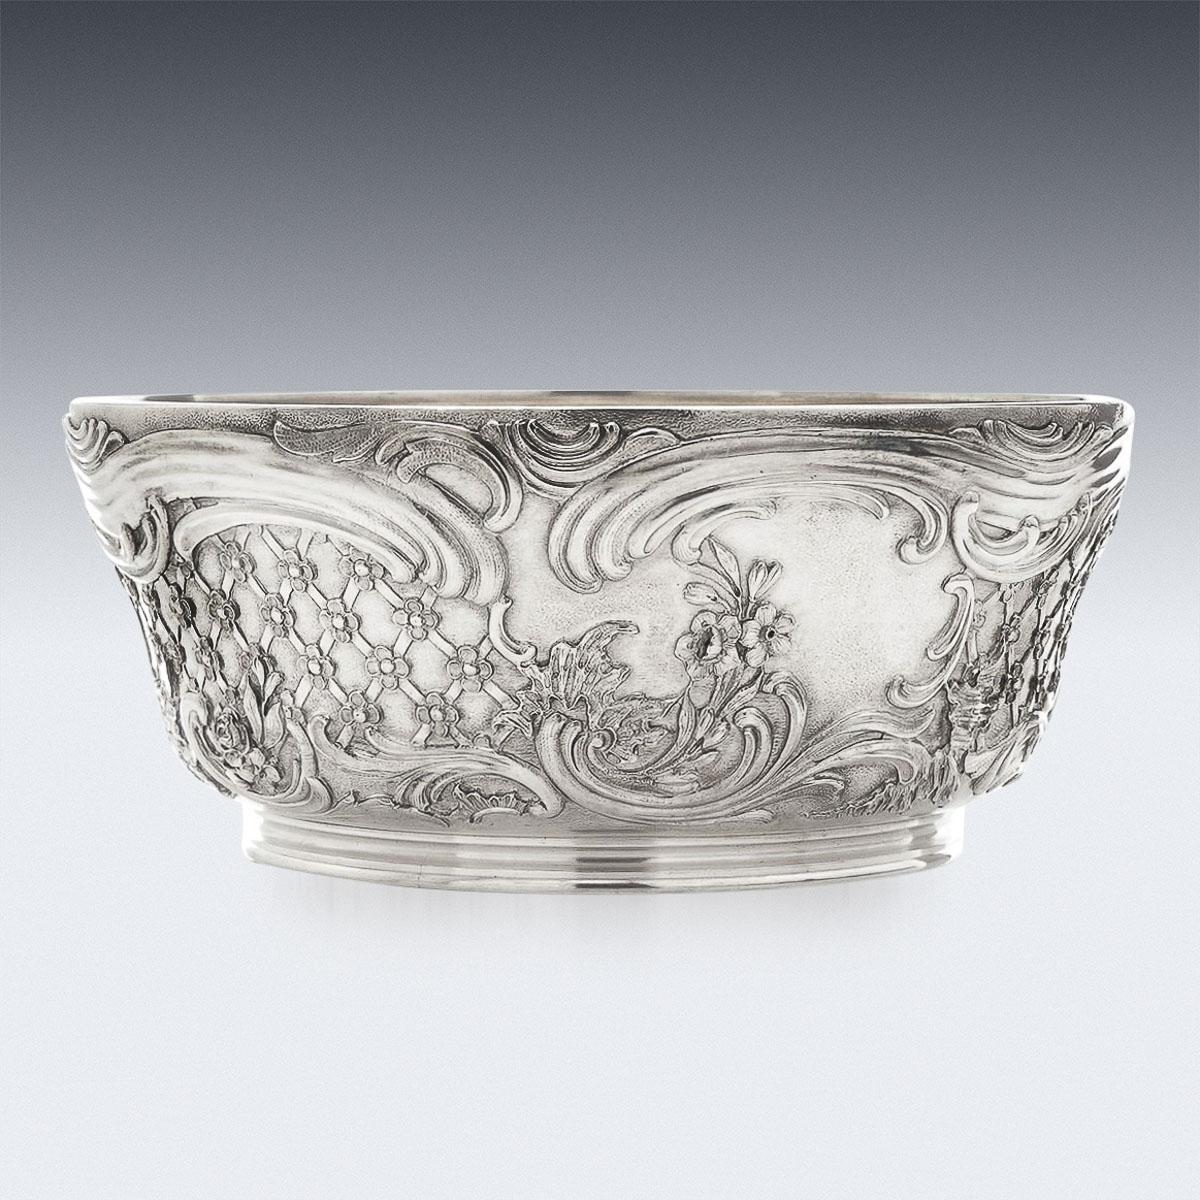 Rococo 19th Century Imperial Russian Faberge Solid Silver Bowl, Rappoport, c.1894